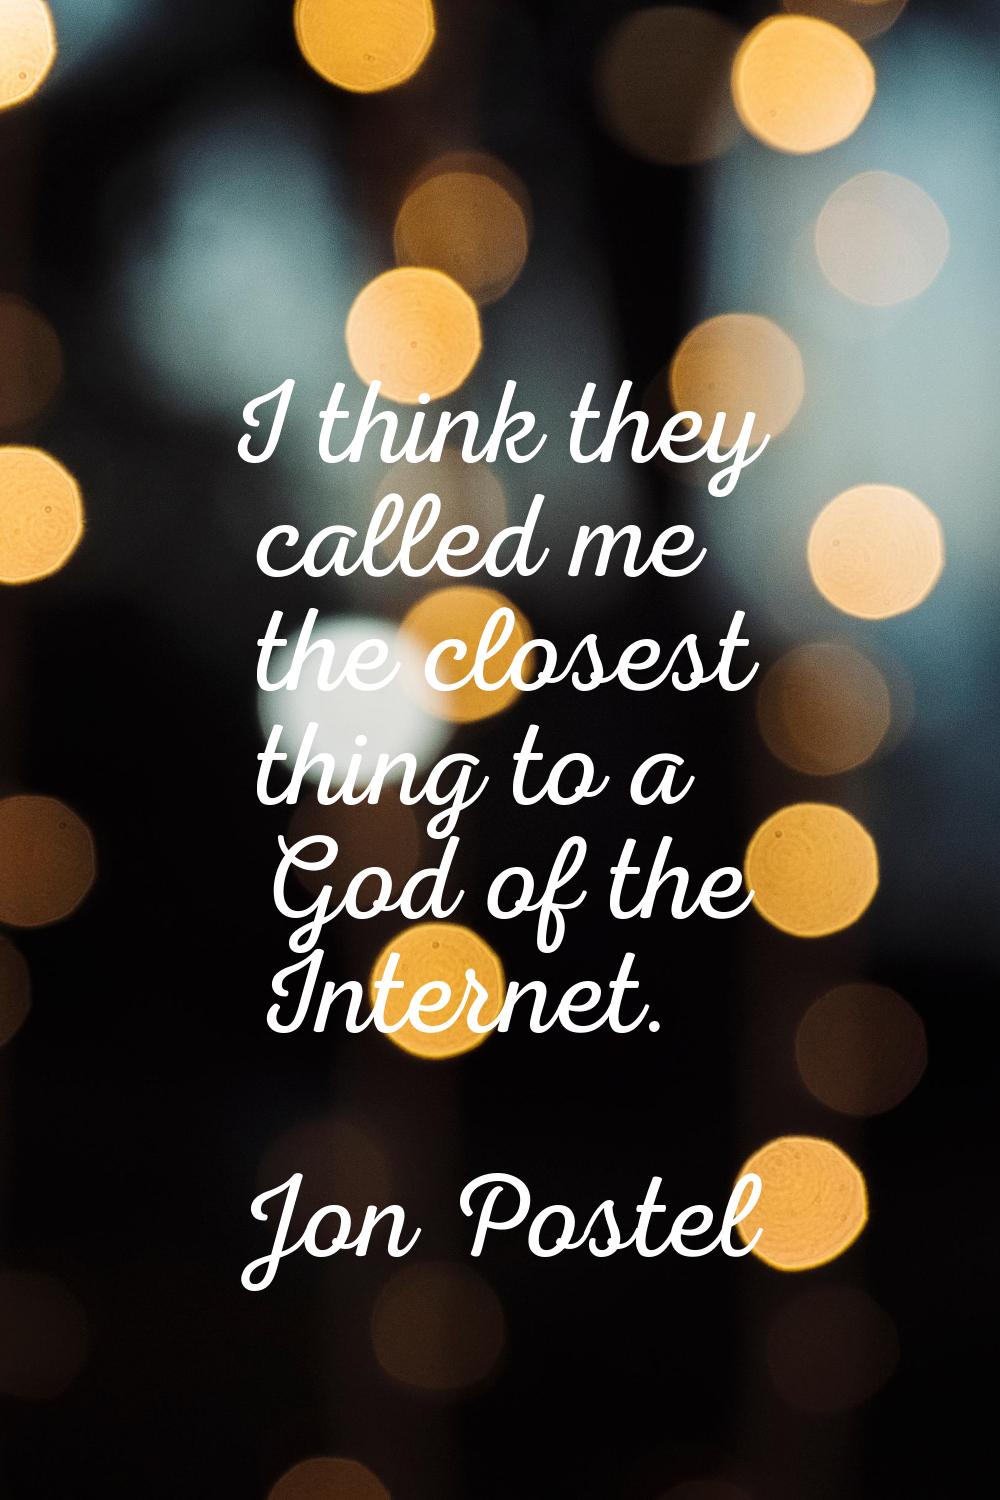 I think they called me the closest thing to a God of the Internet.